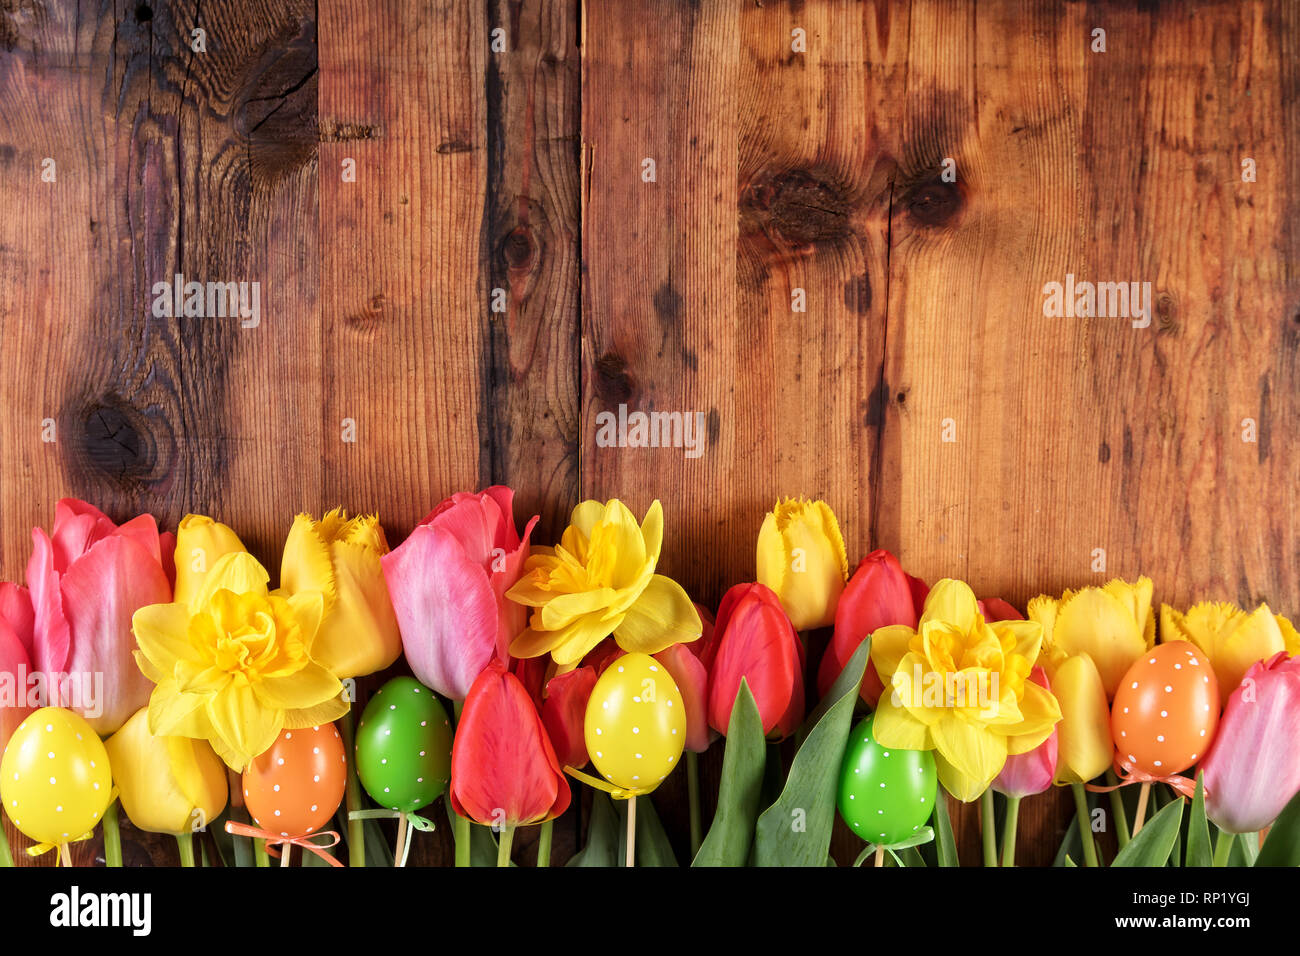 Easter rustic background. Pink and yellow tulips and daffodil flowers in the row on old wooden planks. Stock Photo